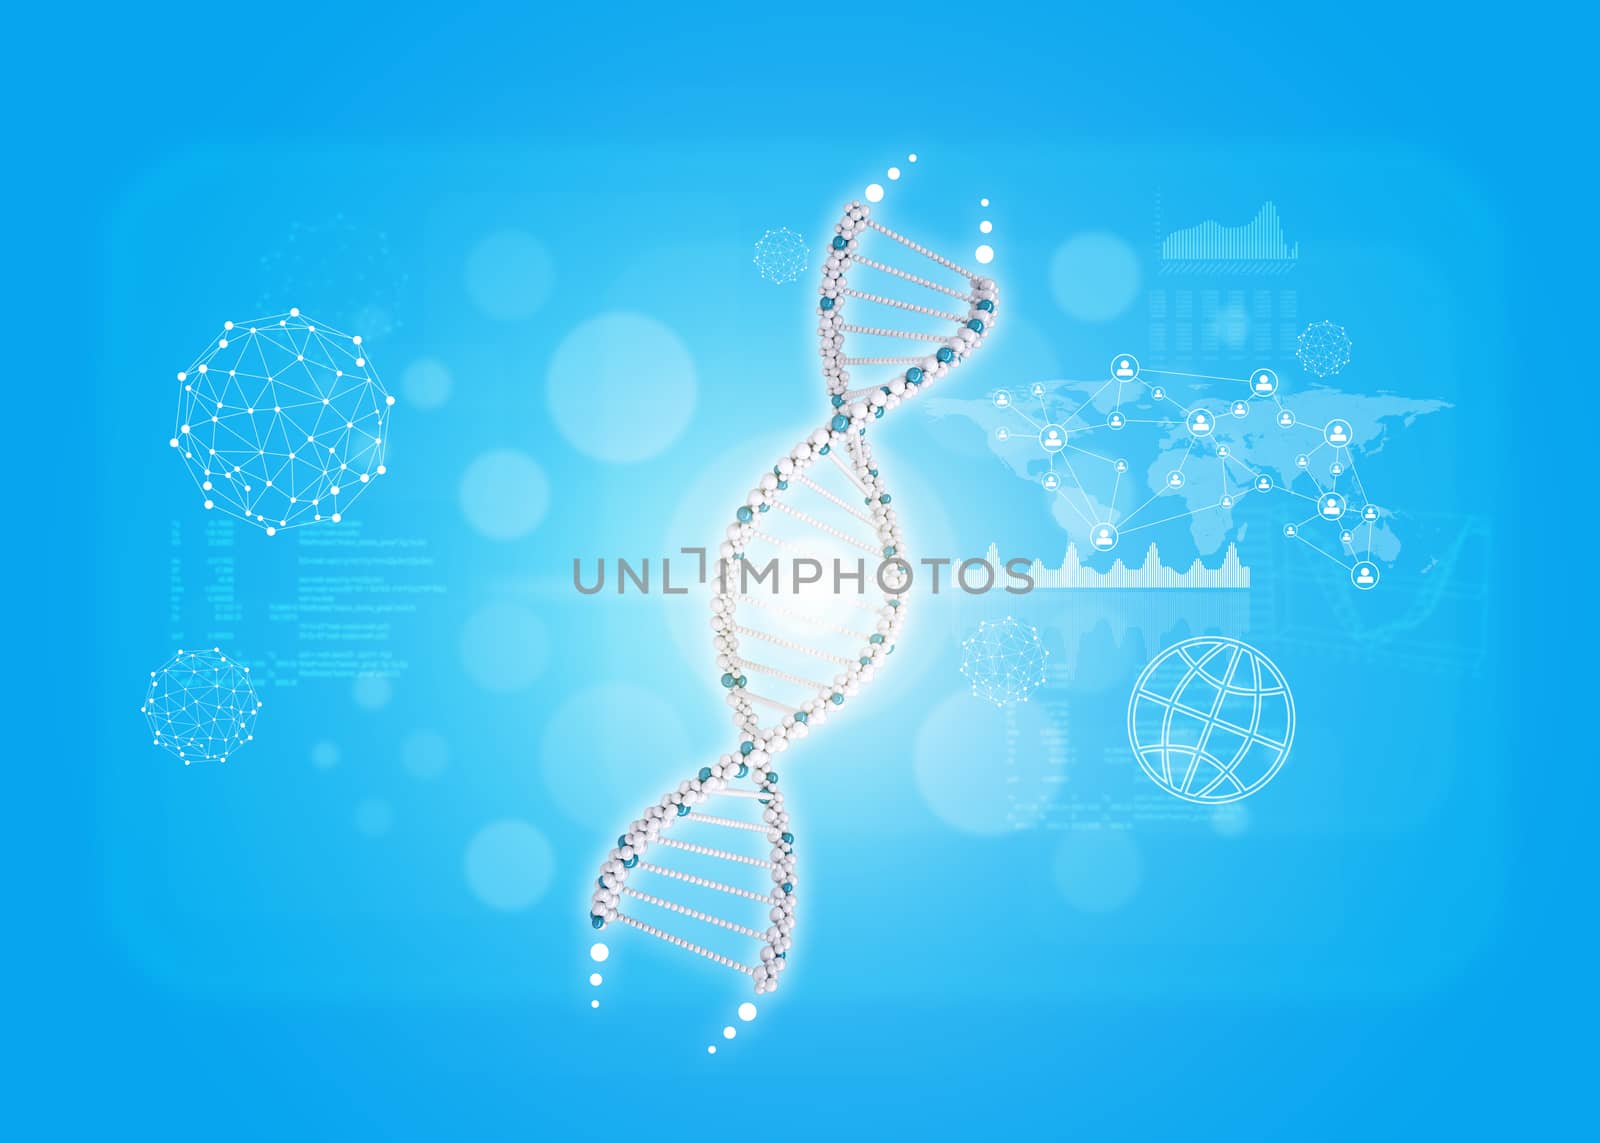 Human DNA. Background with world map, graph and wire-frame. Blue background